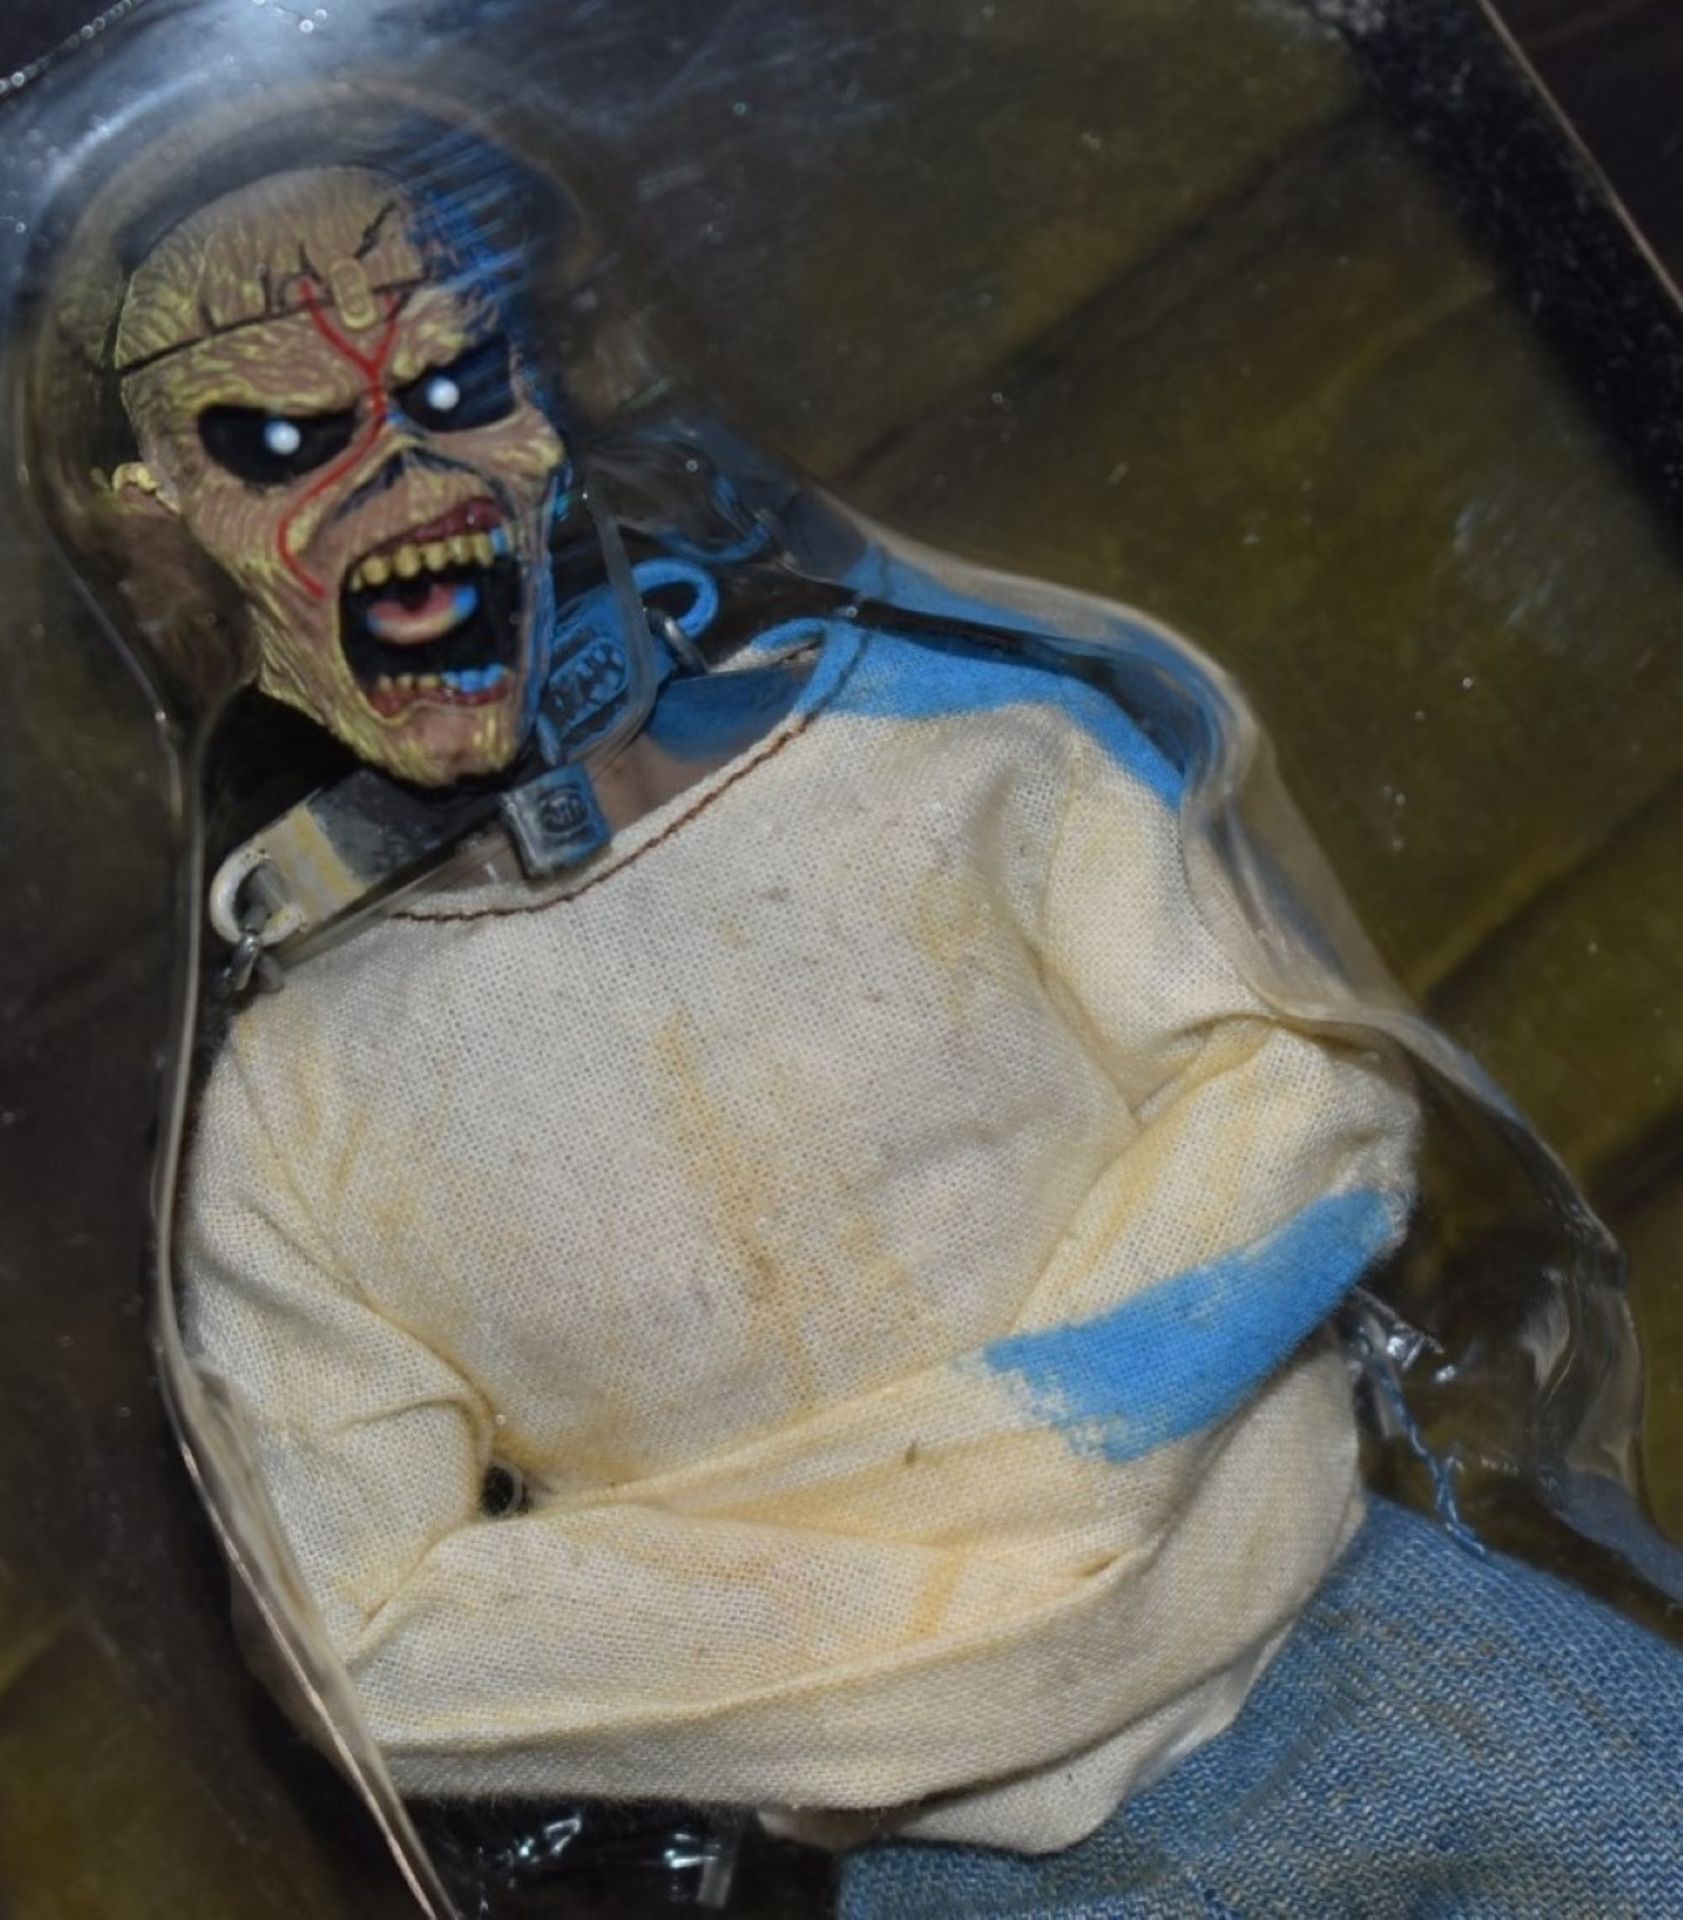 1 x Iron Maiden Piece of Mind Eddie Clothed 7 Inch Action Figure By Neca - New & Unused - RRP £60 - Image 4 of 9